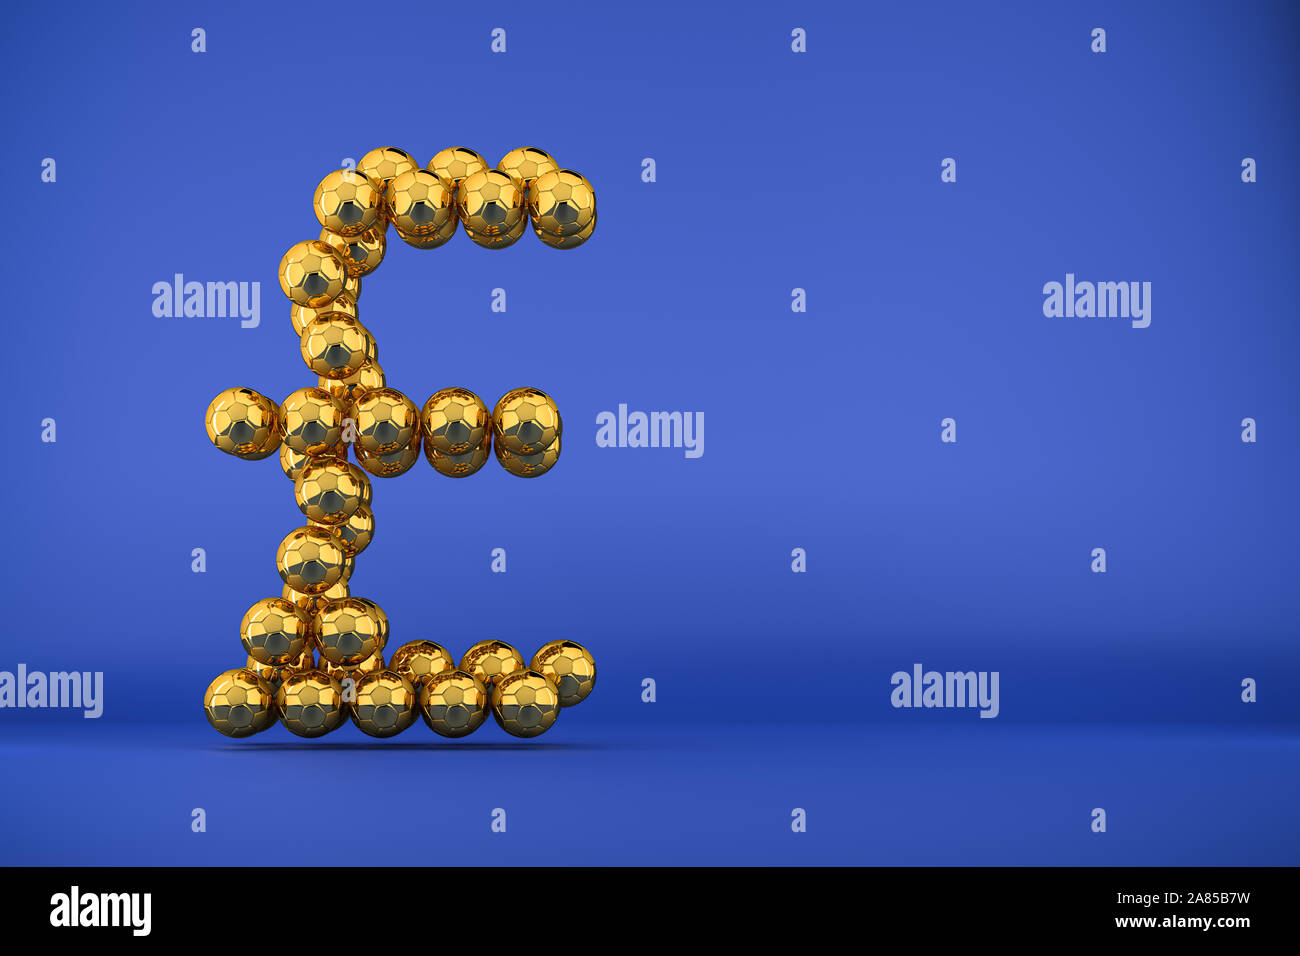 3D render: Golden Soccer balls forming a British Pound sign. Big Business / corruption in sports, football, soccer. Blue Background. Copy space to the Stock Photo